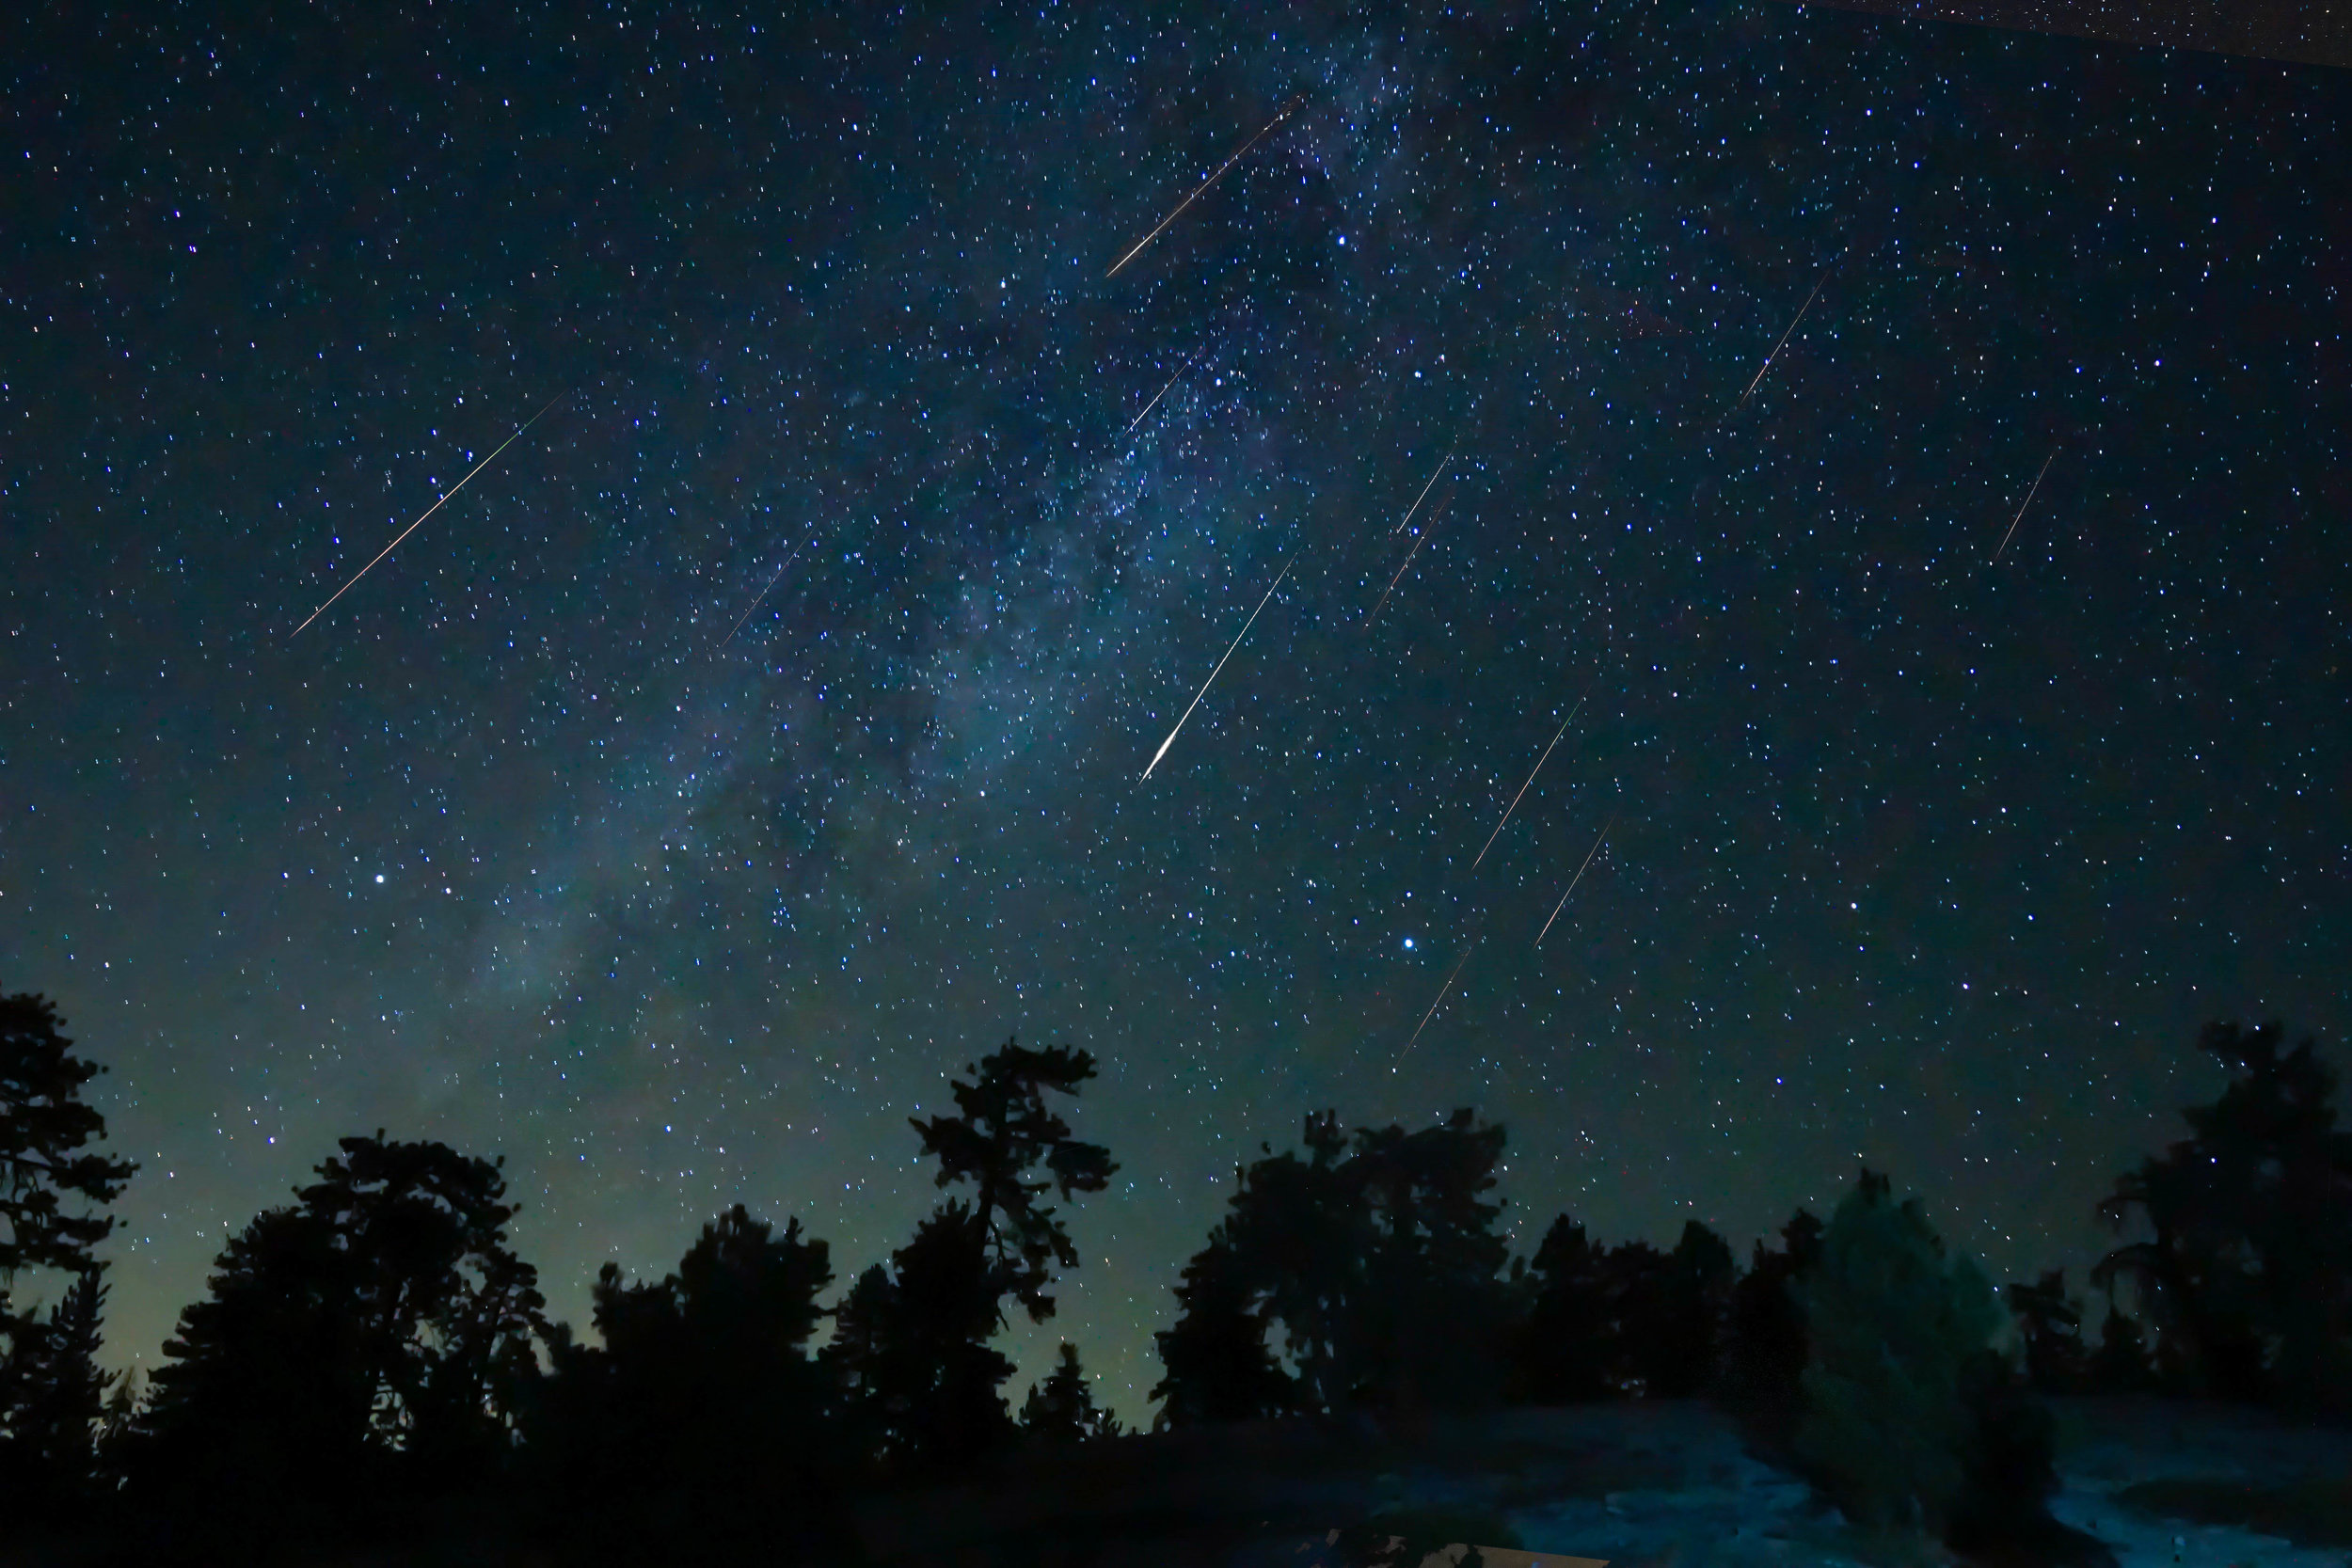 Spaced out as always, the Cosmonaut crew blasted off to the Sierras to camp & gaze upon a historic Perseids Meteor Shower as it shot down nearly 200 meteors per hour